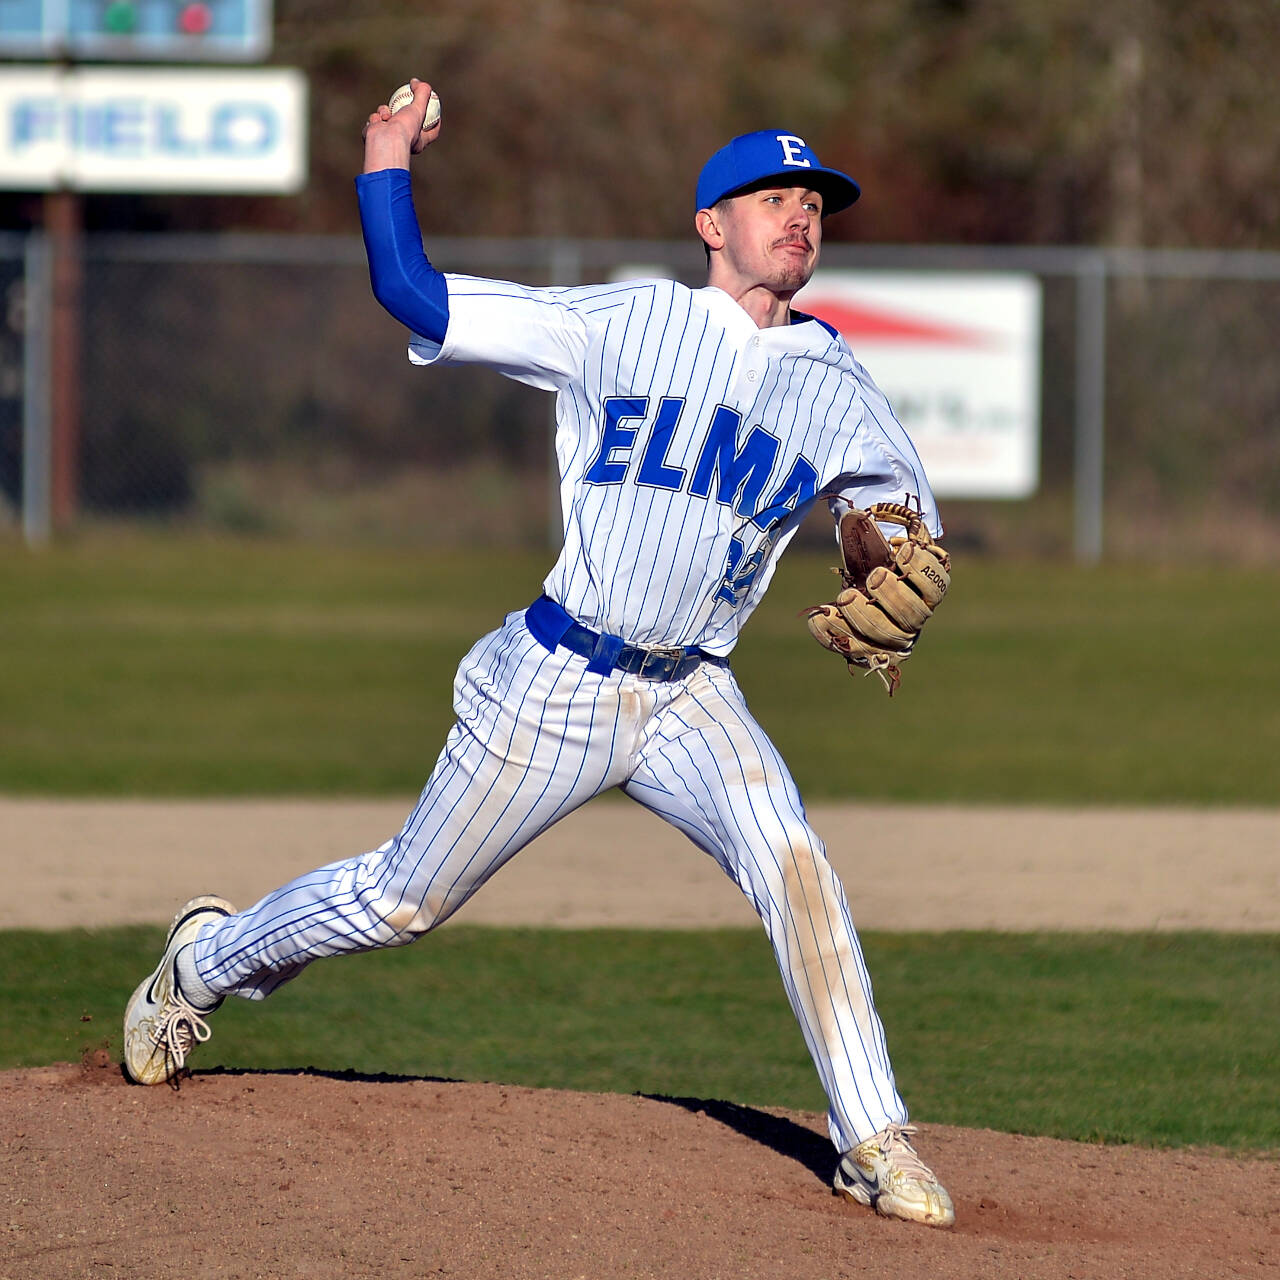 RYAN SPARKS | THE DAILY WORLD Elma relief pitcher Ethan Camus threw three scoreless innings in Elma’s 8-4 win over Black Hills on Wednesday in Elma.